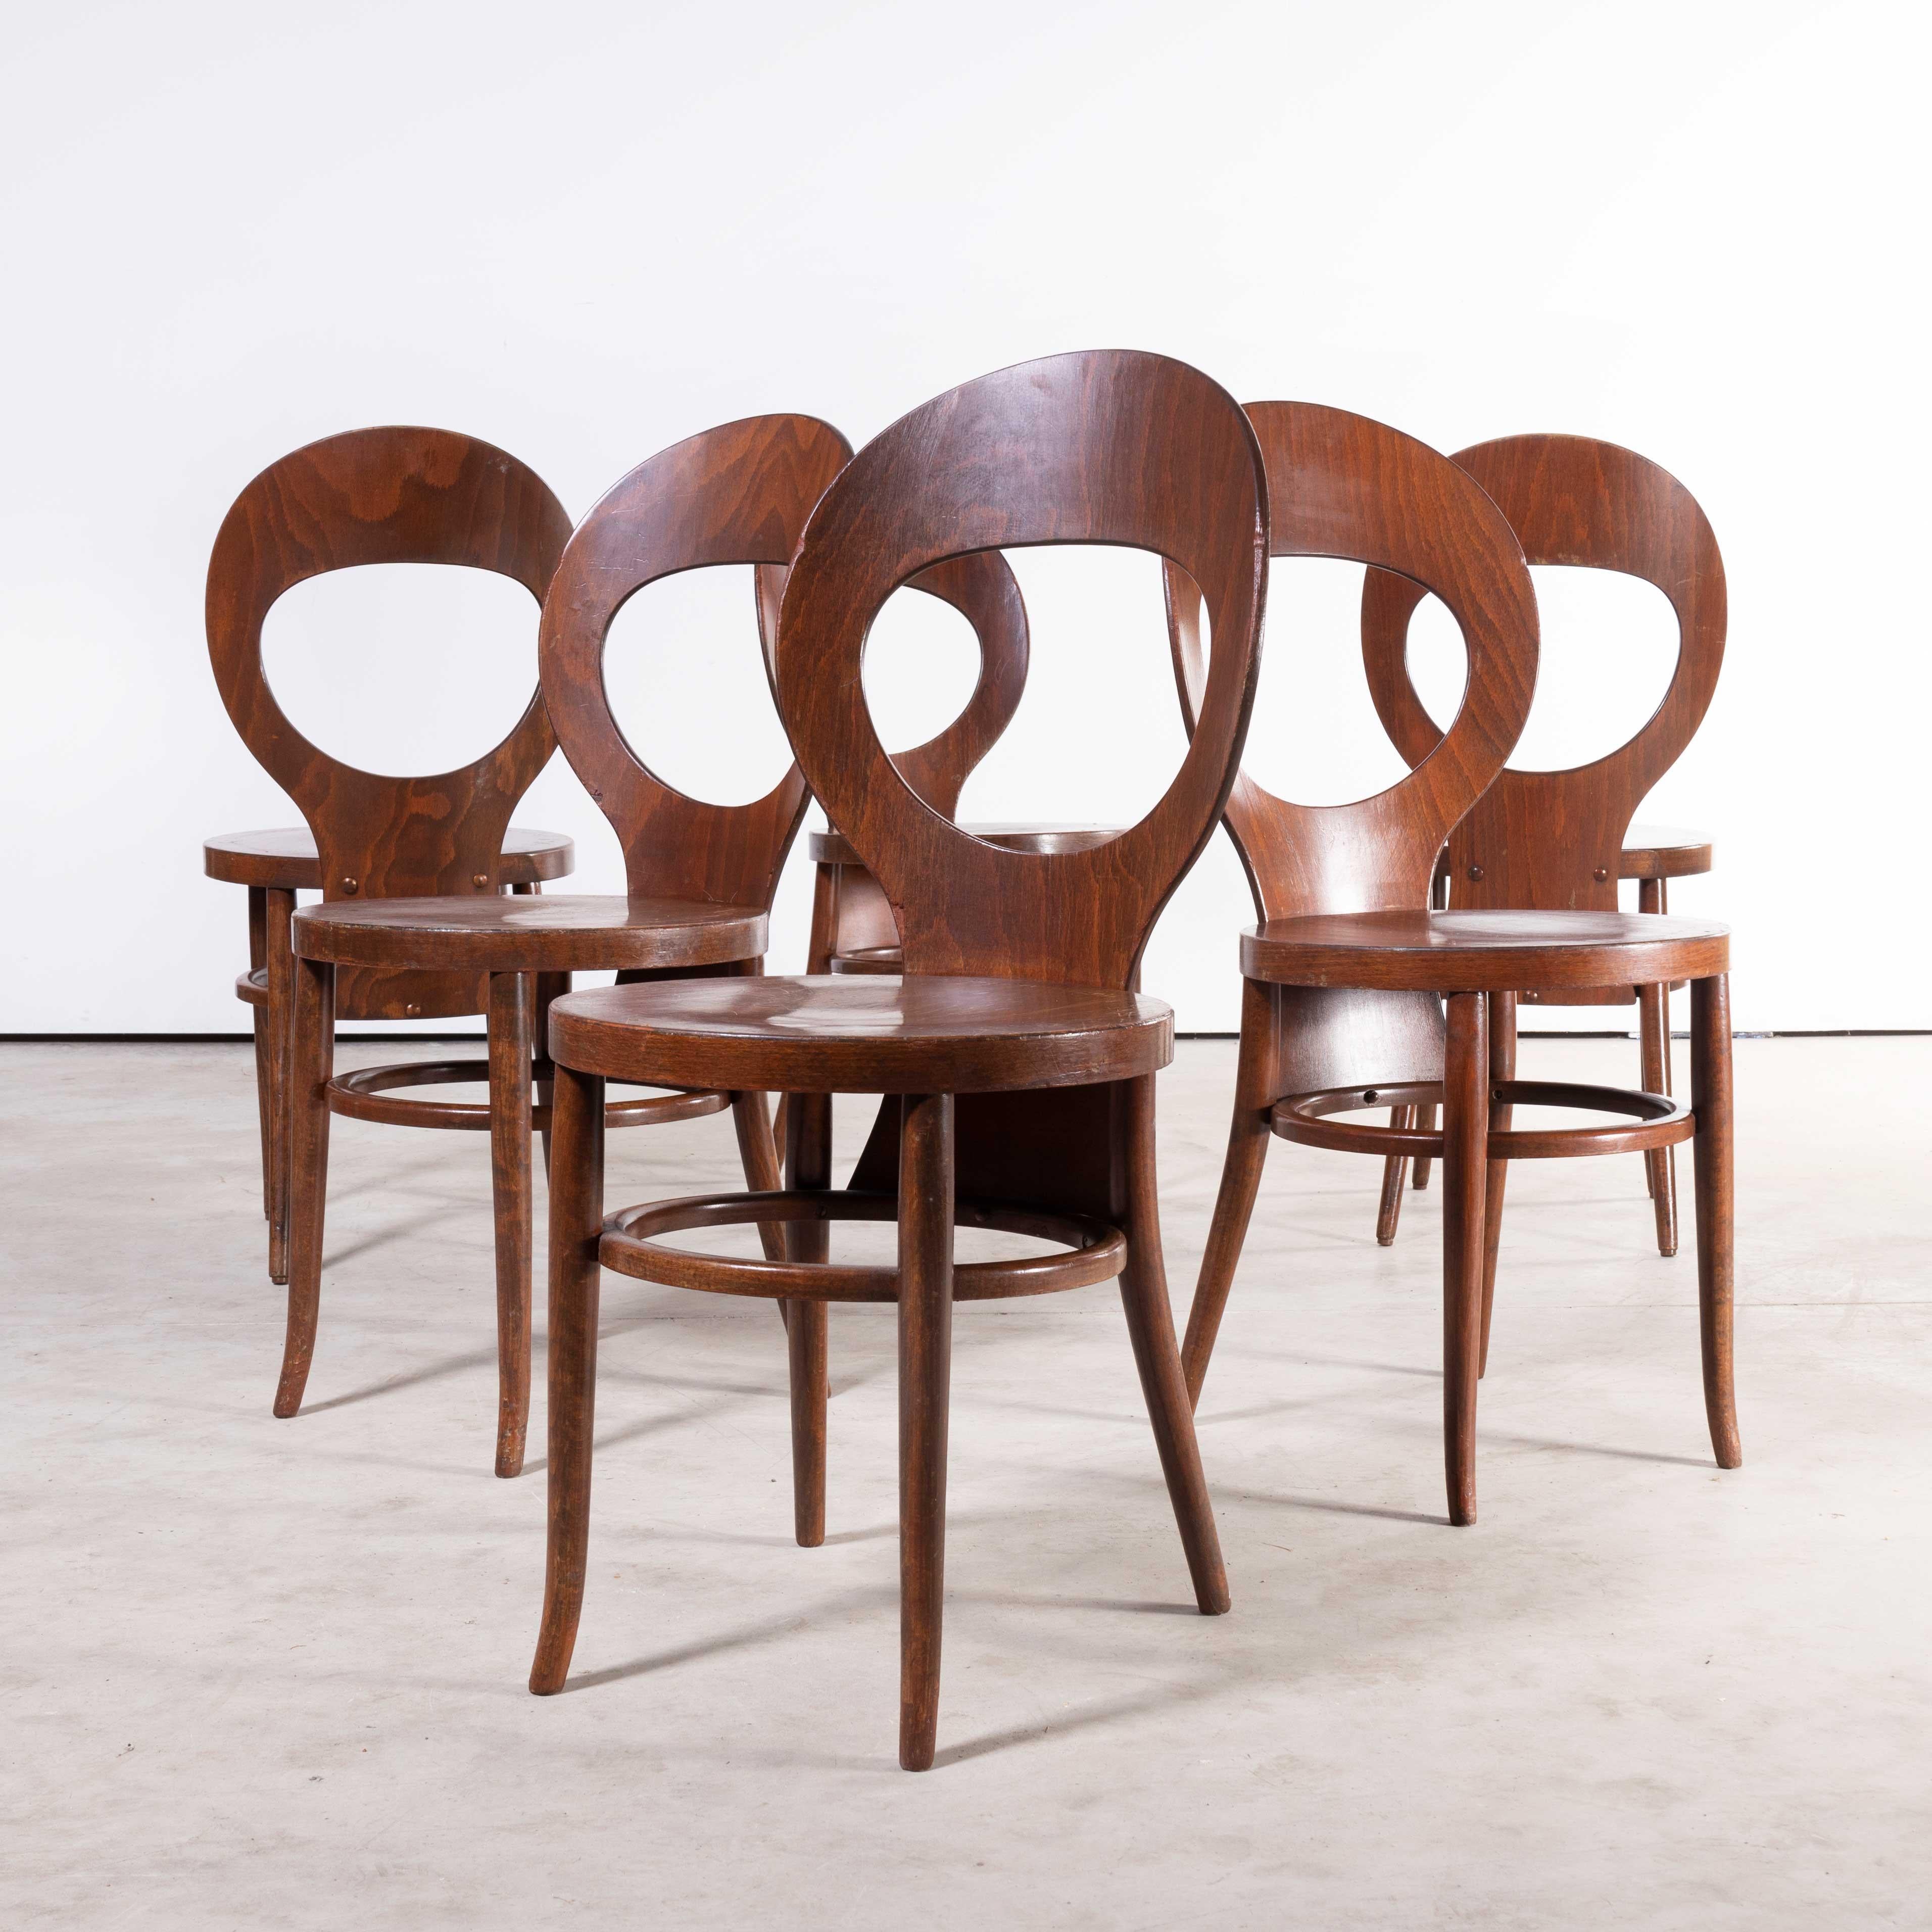 1960’s French Baumann Bentwood Dark Moutte Dining Chair – Set Of Six
1960’s French Baumann Bentwood Dark Moutte Dining Chair – Set Of Six. Classic beech chair made in France by the Baumann. Baumann is a slightly off the radar French producer just